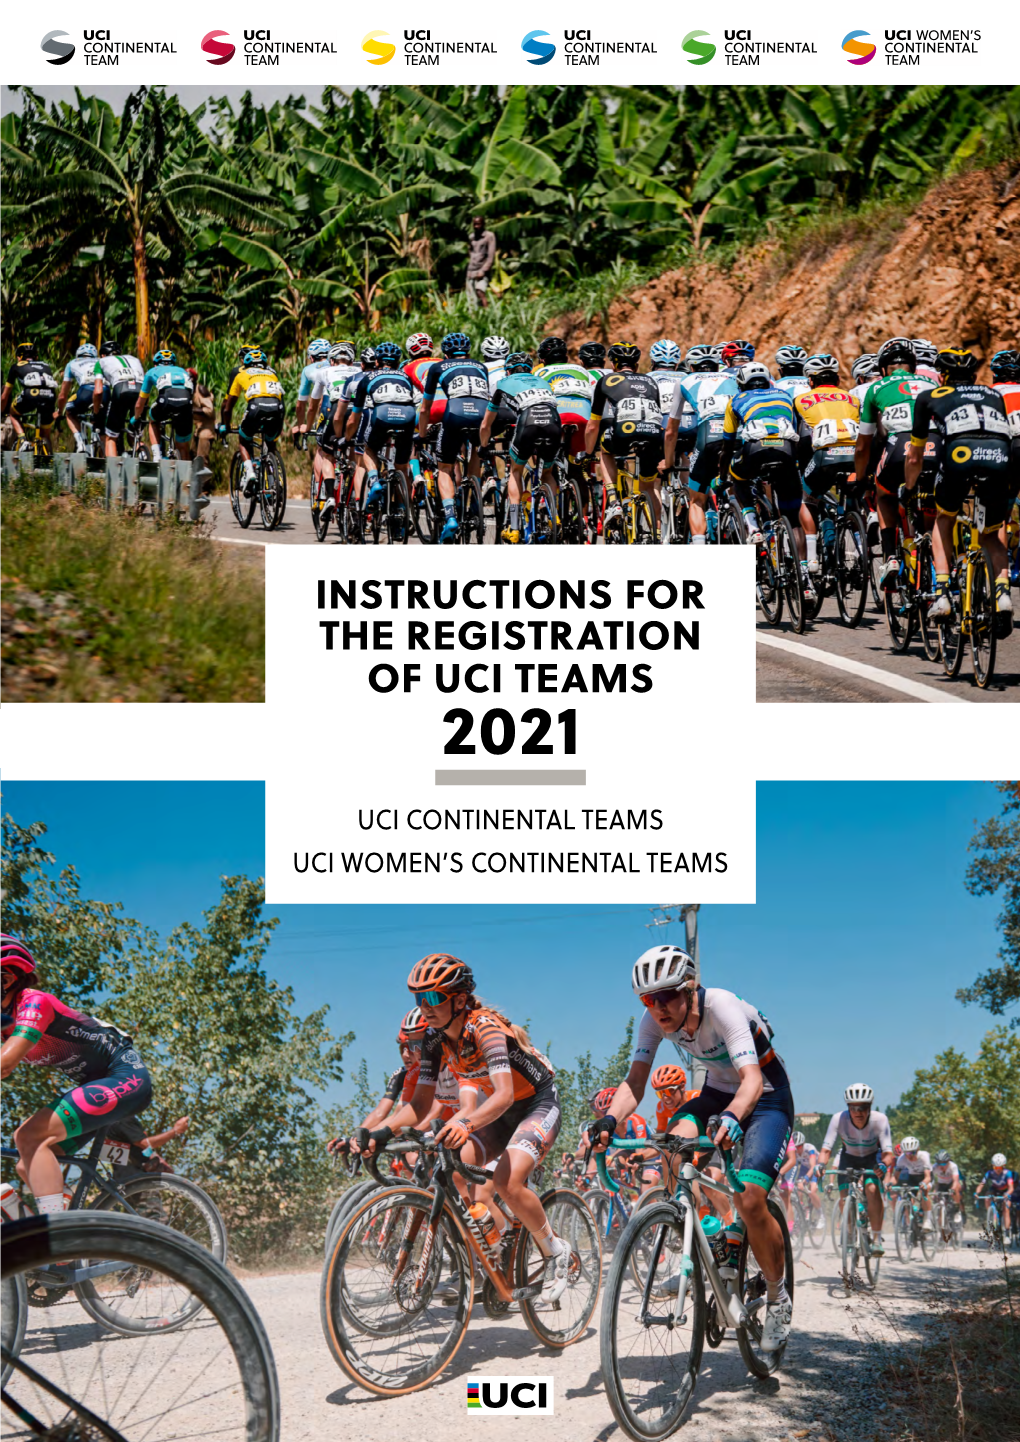 Instructions for the Registration of Uci Teams 2021